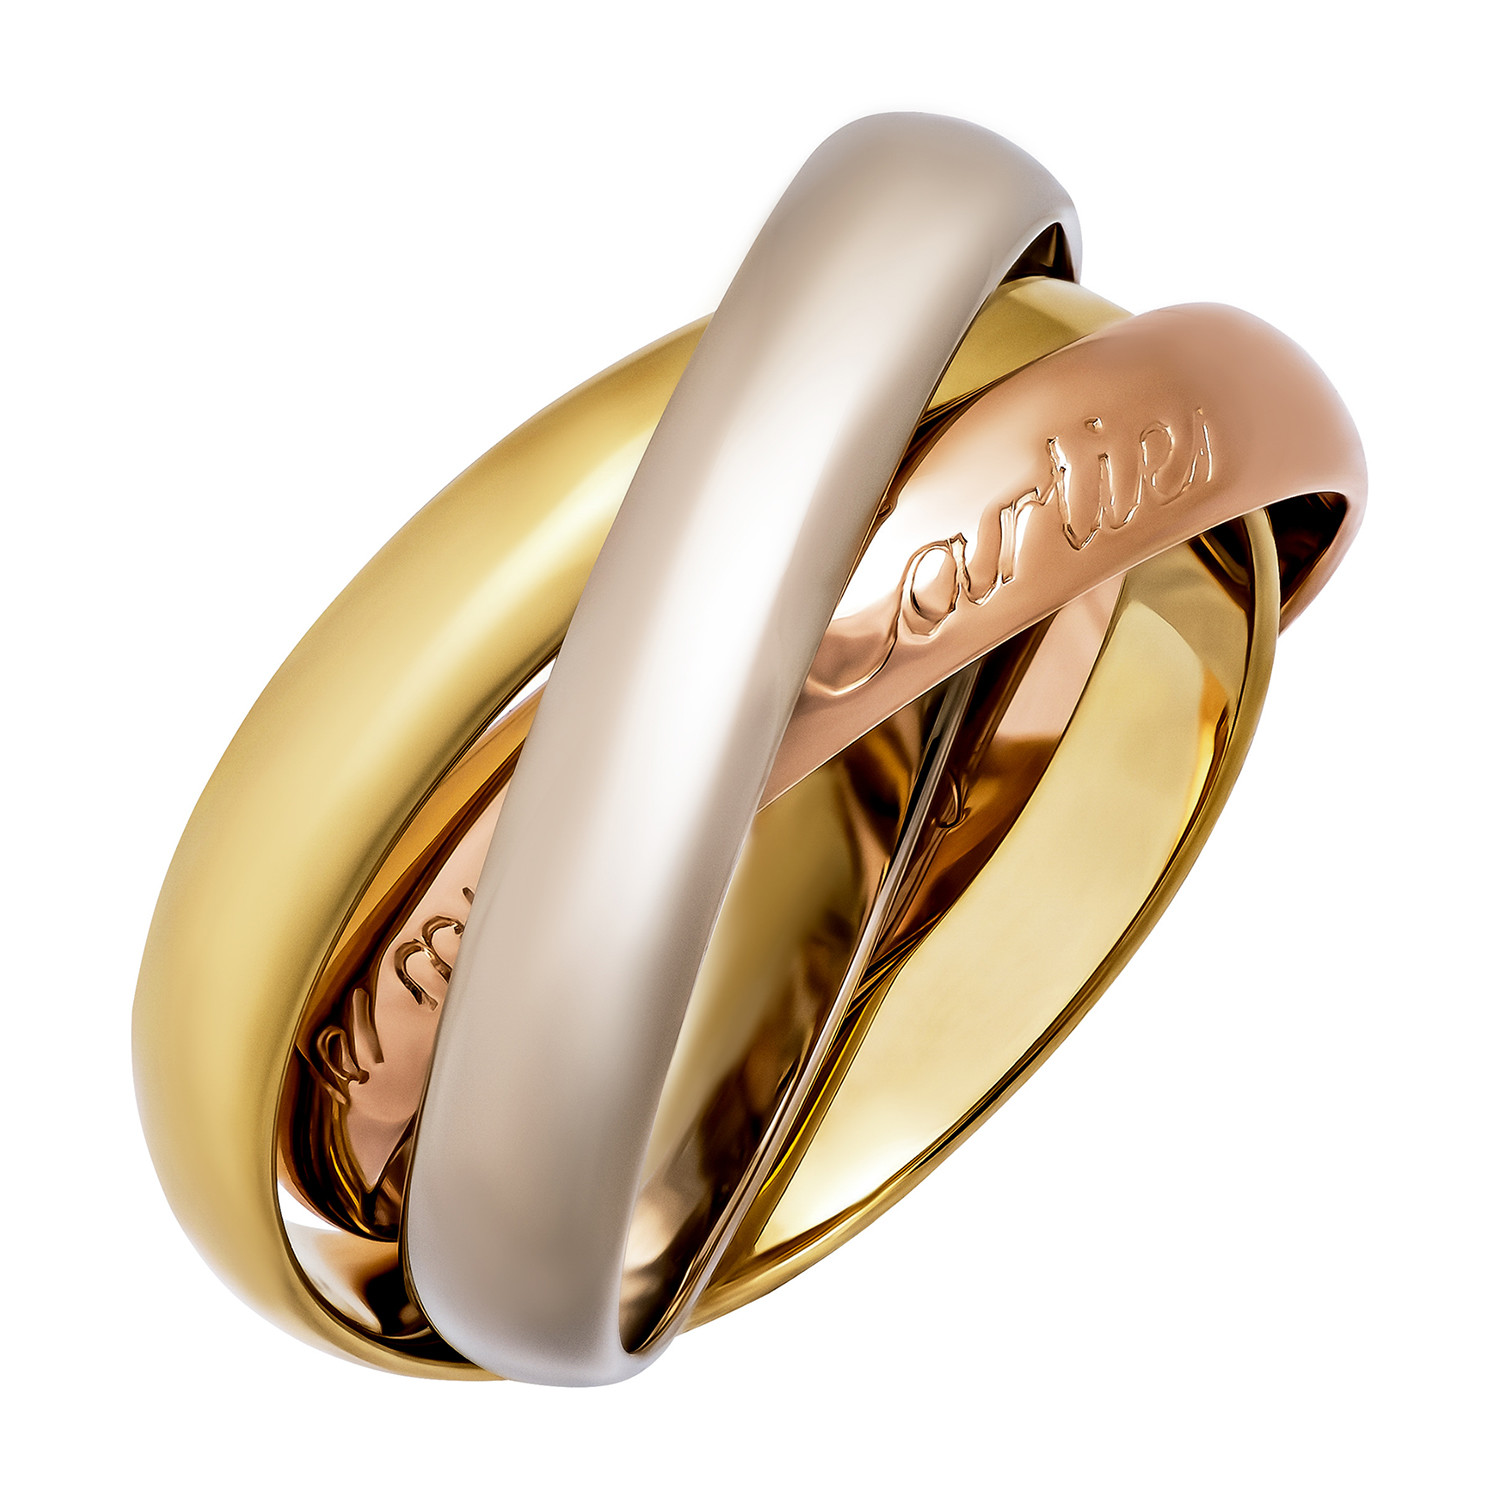 Cartier 18k Three-Tone Gold Le Must Trinity Small Ring // Ring Size: 5.